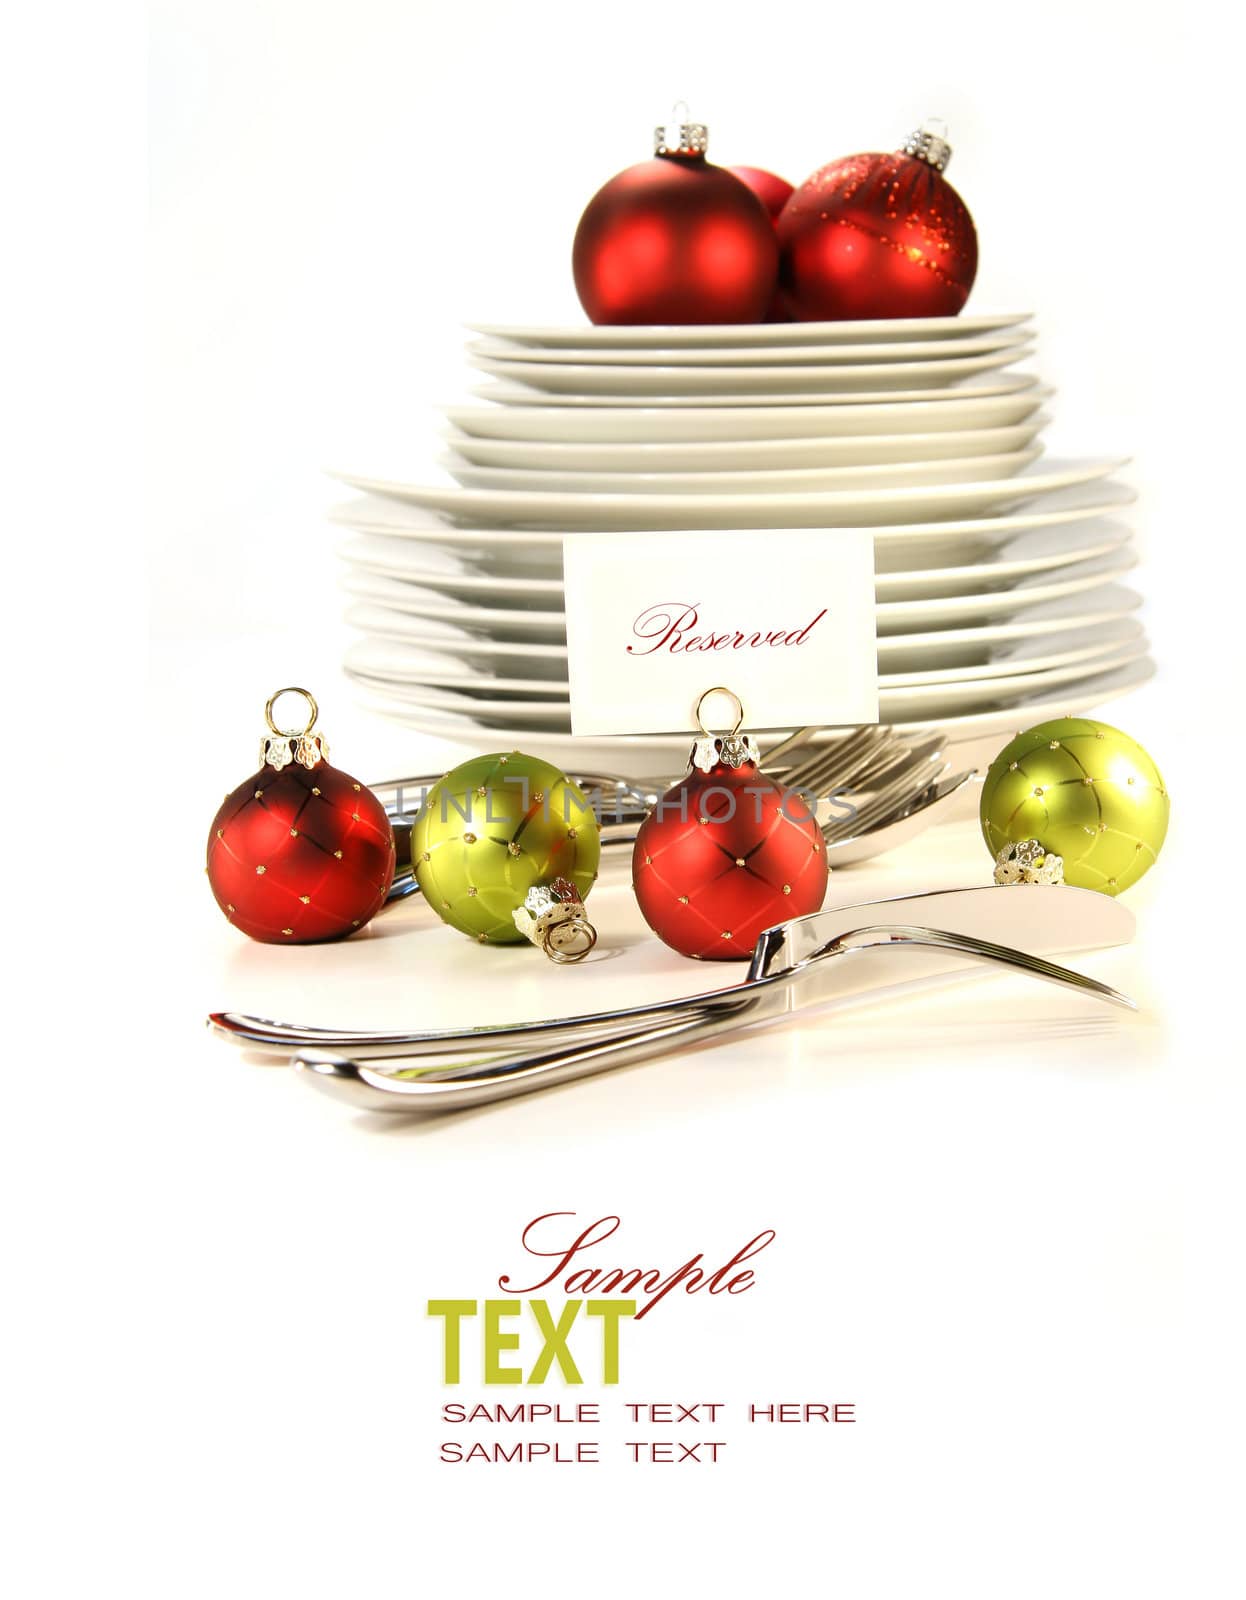 Festive place card holders with plates and cutlery on white background